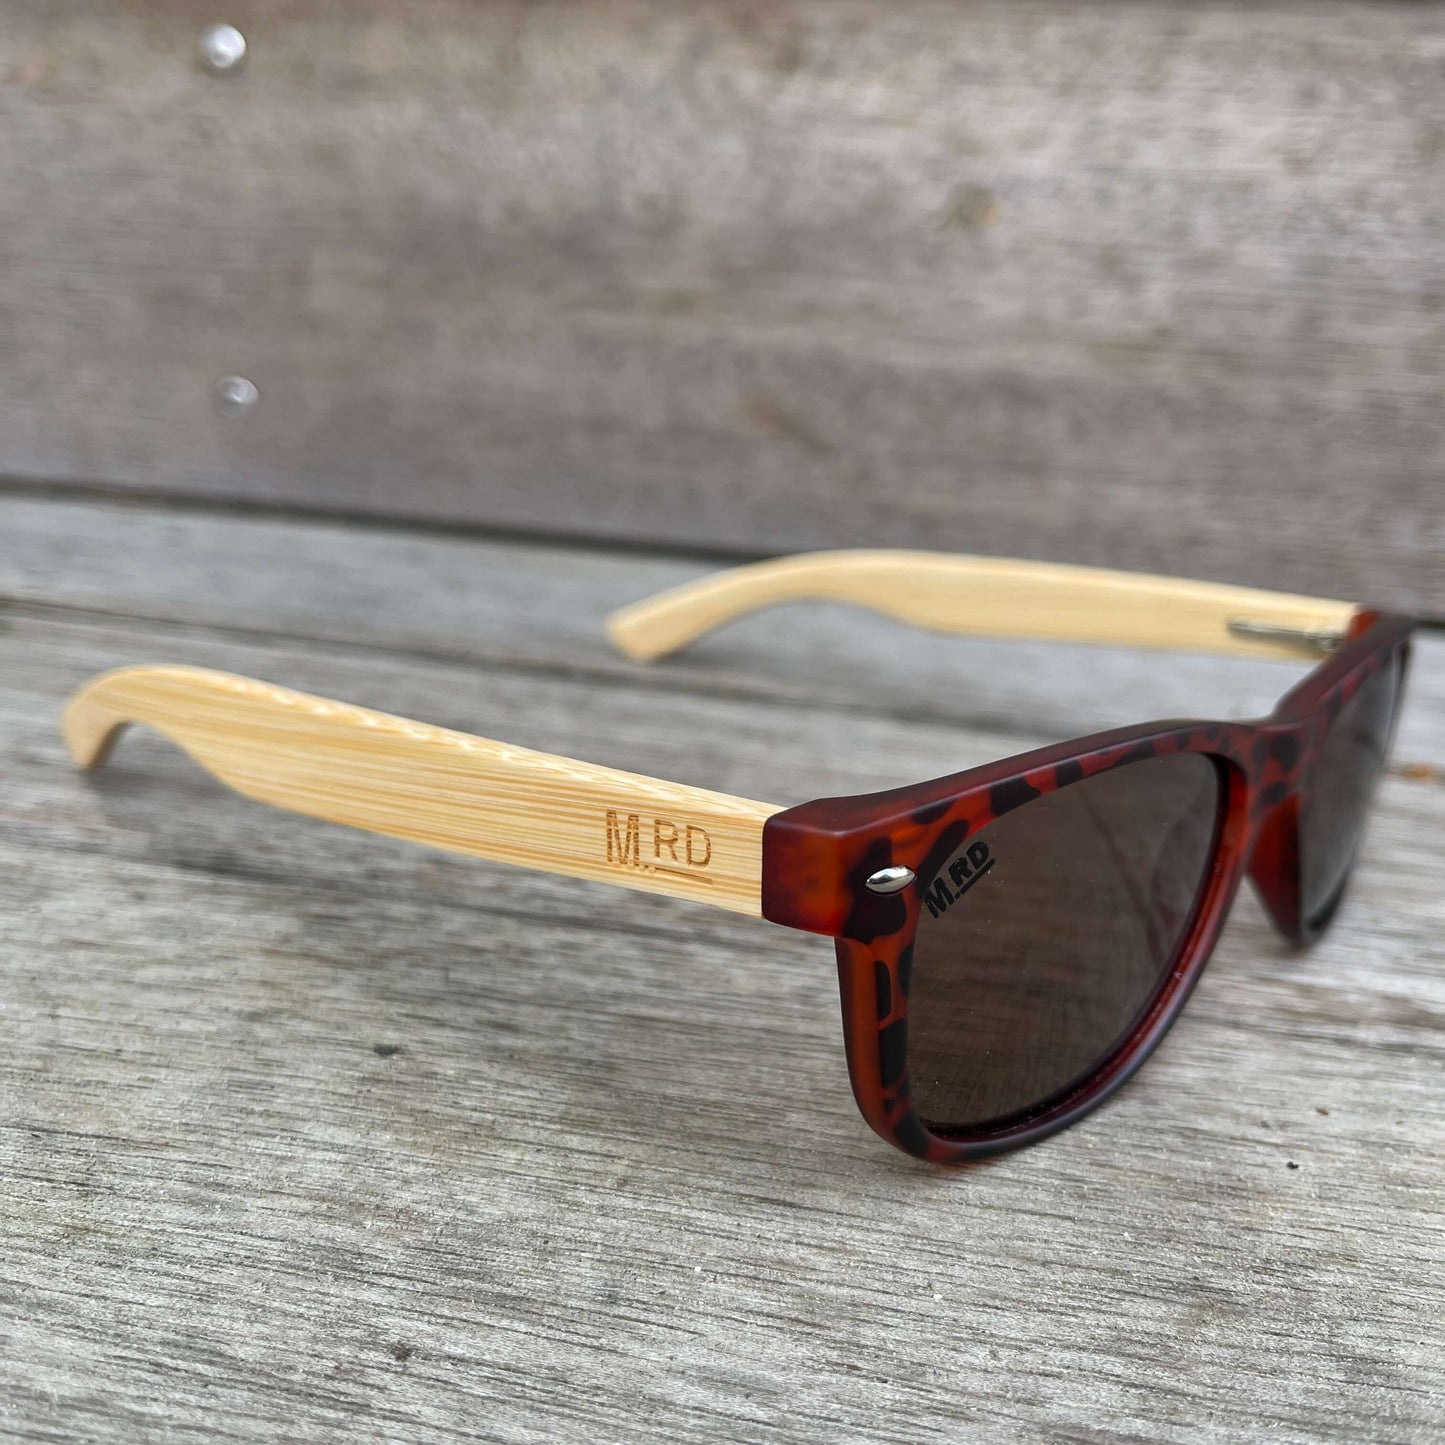 Kids sunglasses with Tortoiseshell frame and wooden arms.